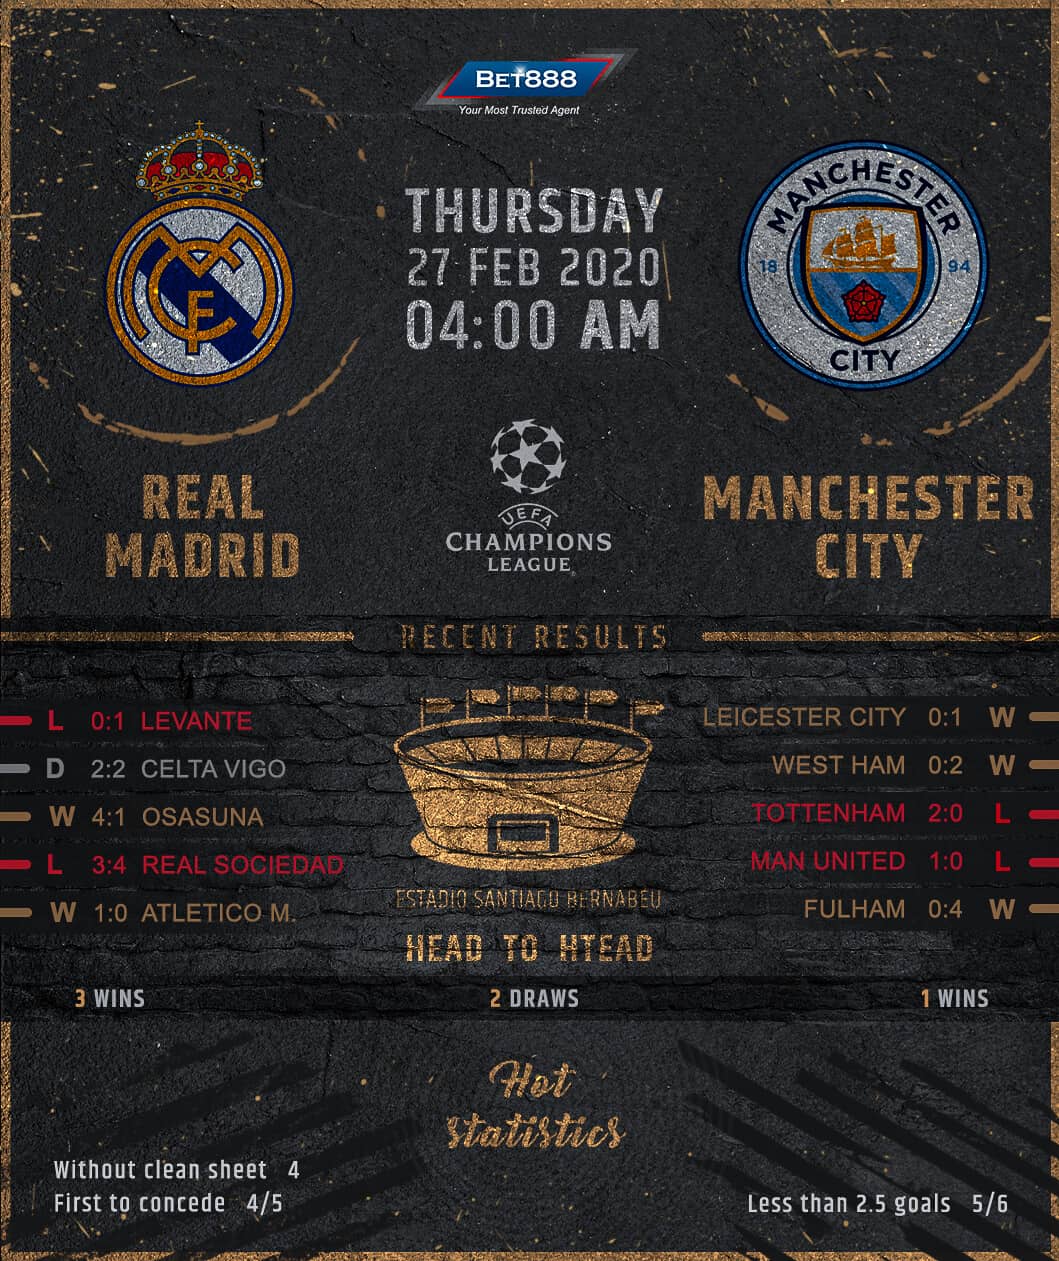 Real Madrid vs Manchester City﻿ 27/02/20